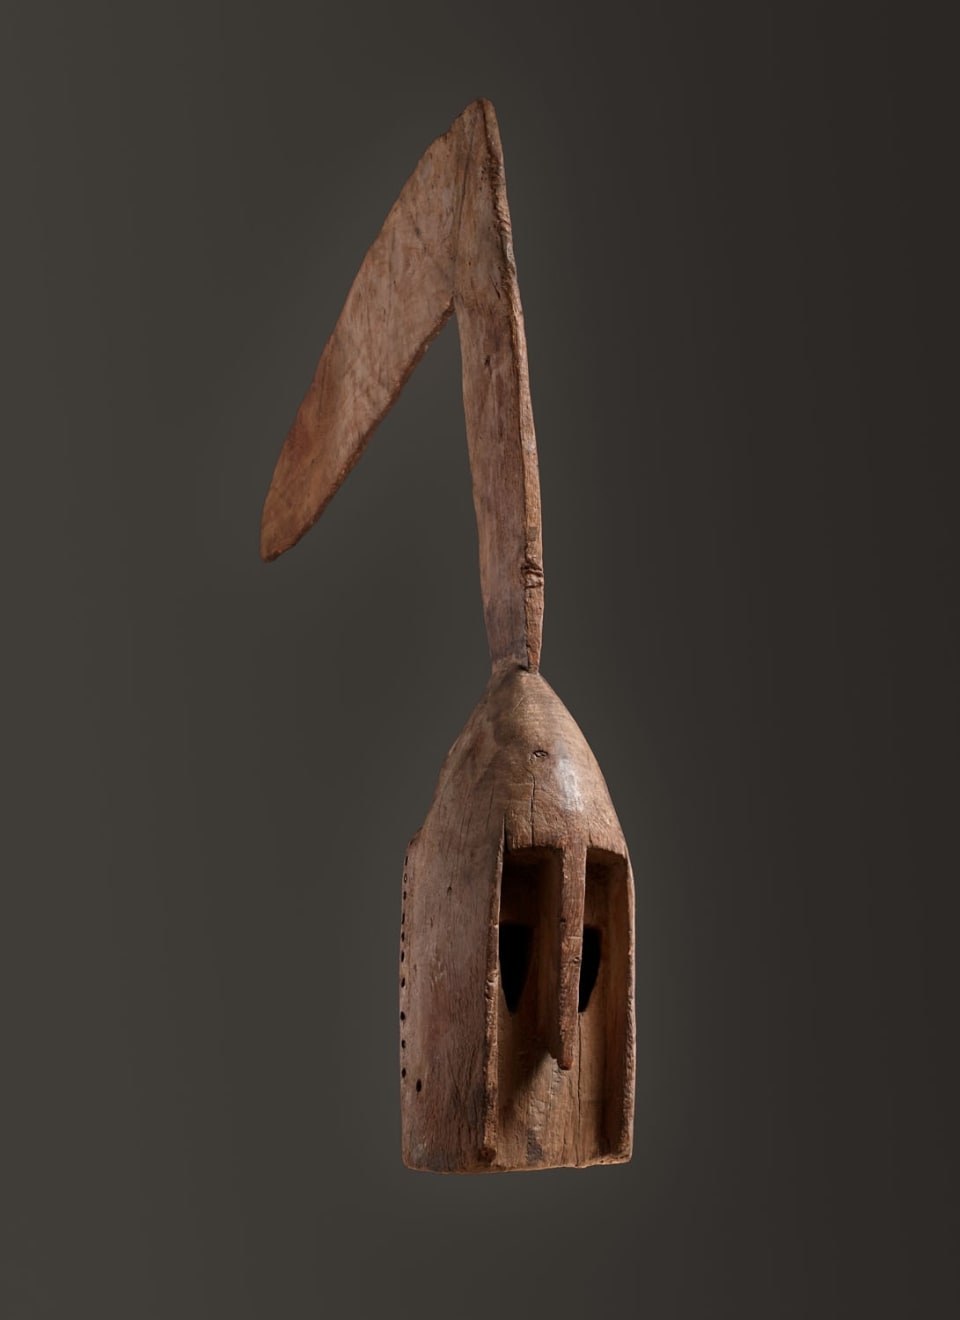 Dogon Mask, elbow of an arm, Late 19th – Early 20th Century, Mali